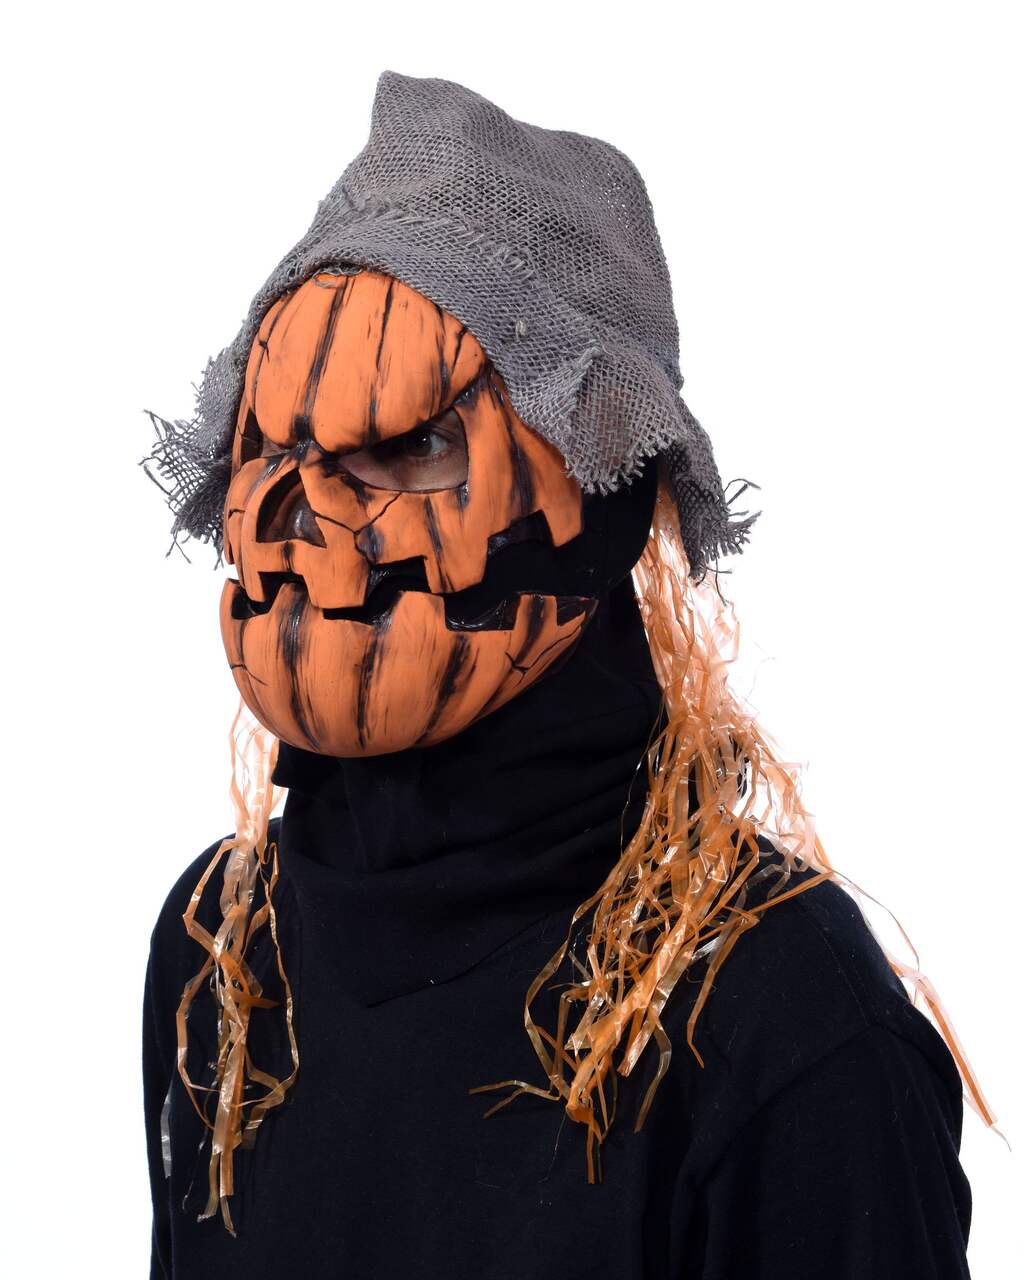 https://media-www.canadiantire.ca/product/automotive/party-city-seasonal/party-city-halloween-harvest/8523371/smashing-jack-halloween-mask-030e012f-d20a-4d68-970e-380a69155c4d-jpgrendition.jpg?imdensity=1&imwidth=640&impolicy=mZoom